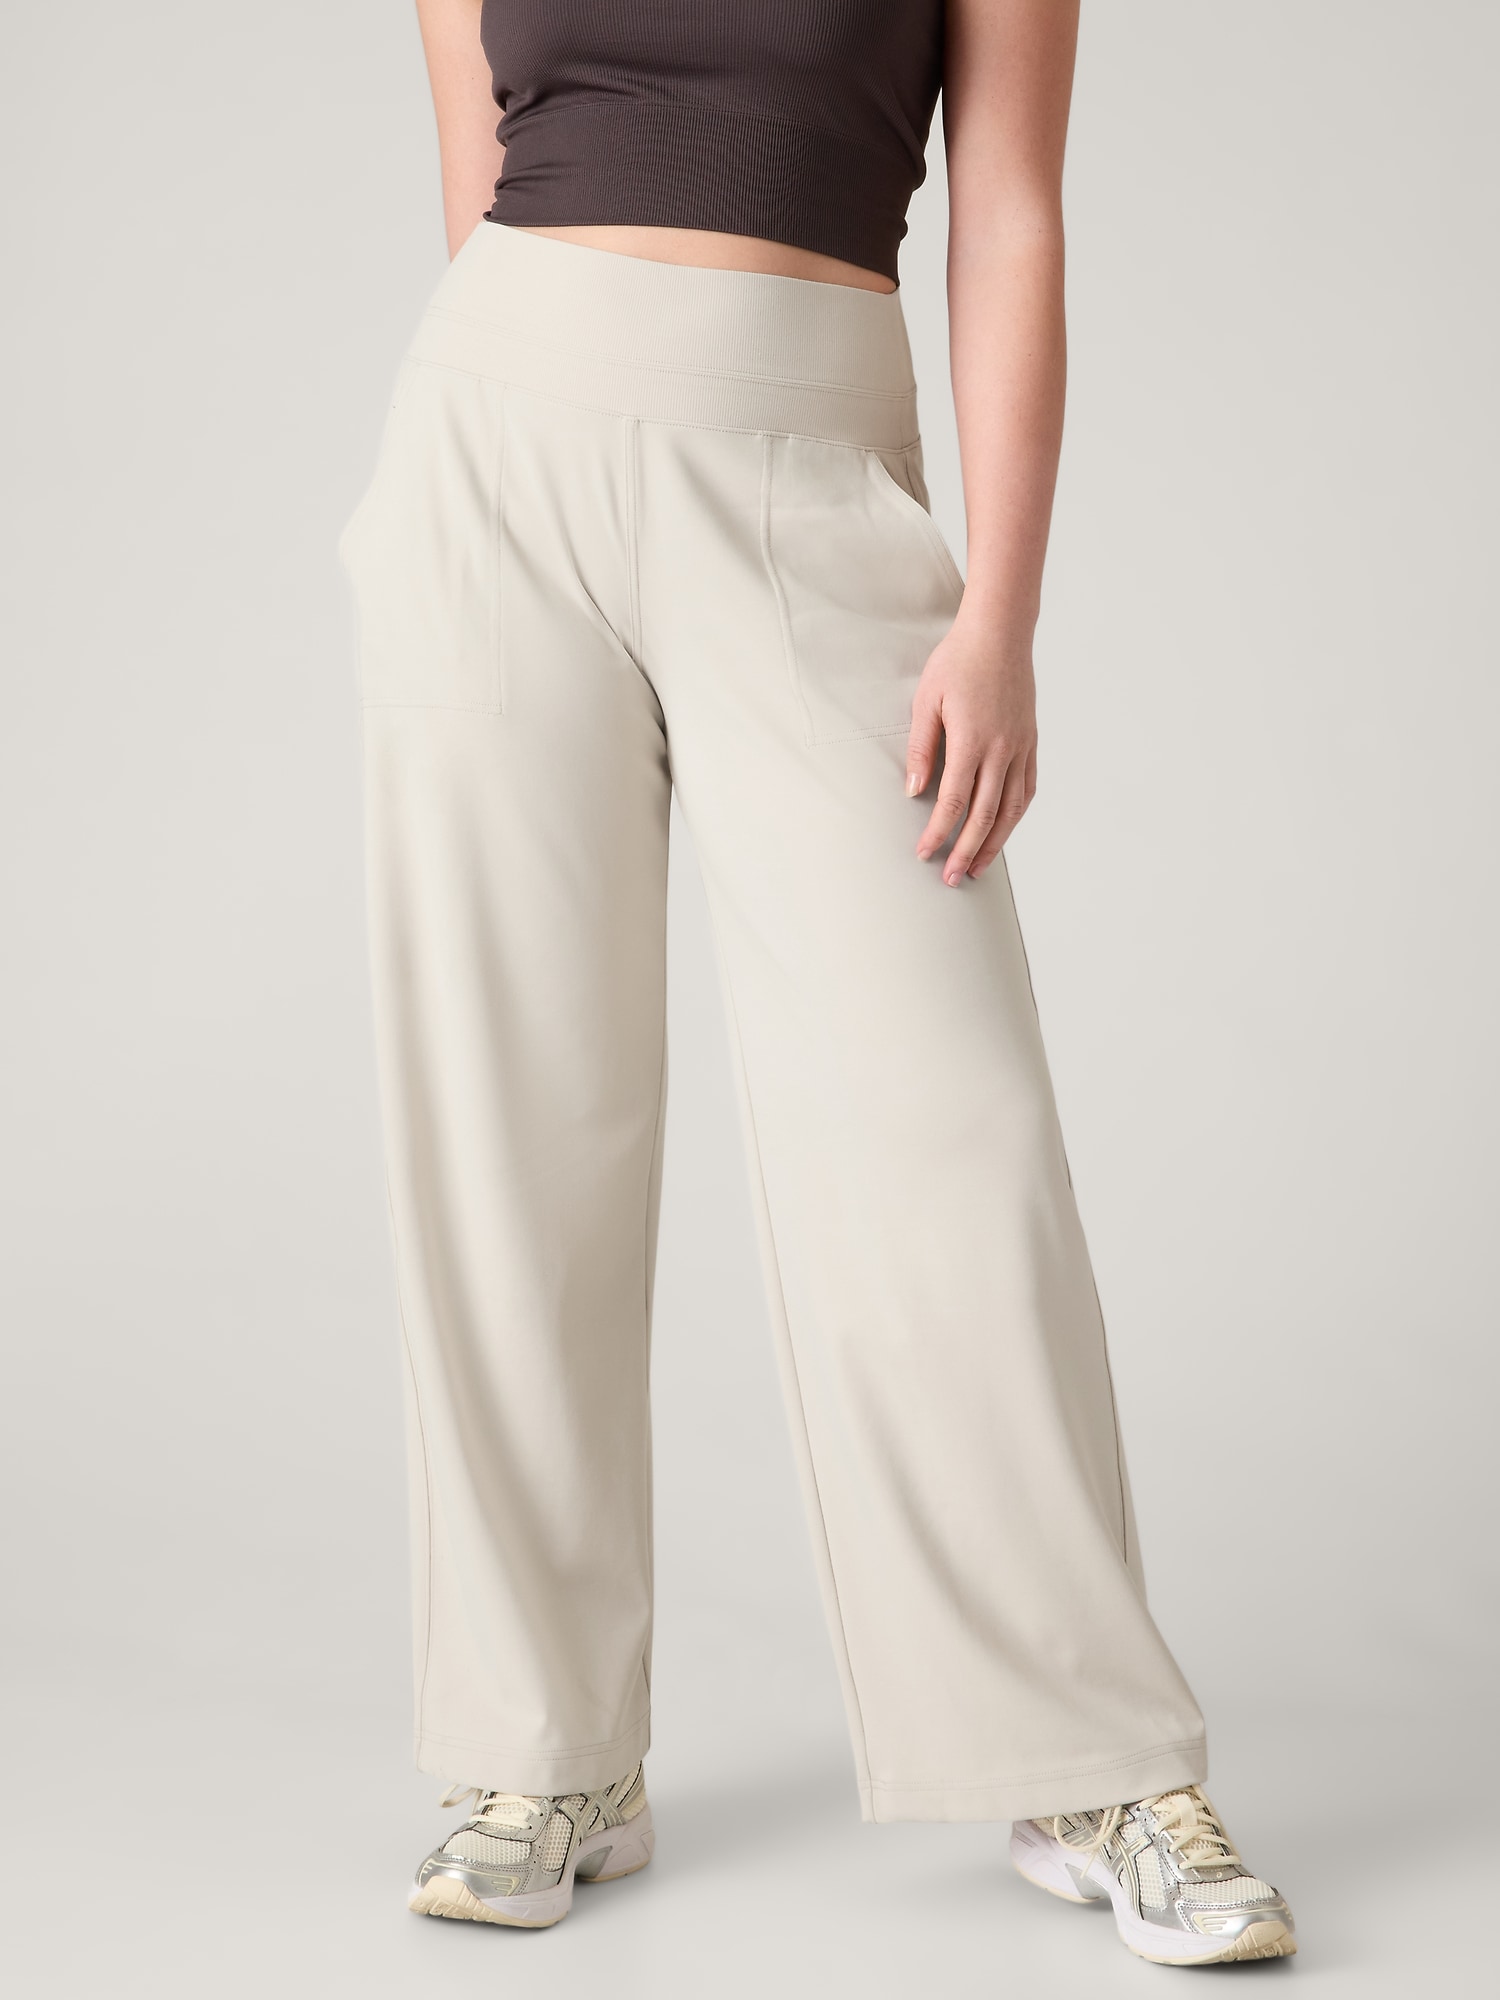 Women's Wide Leg Pants with Elastic Waist and Pockets in 6 Colors S-XL